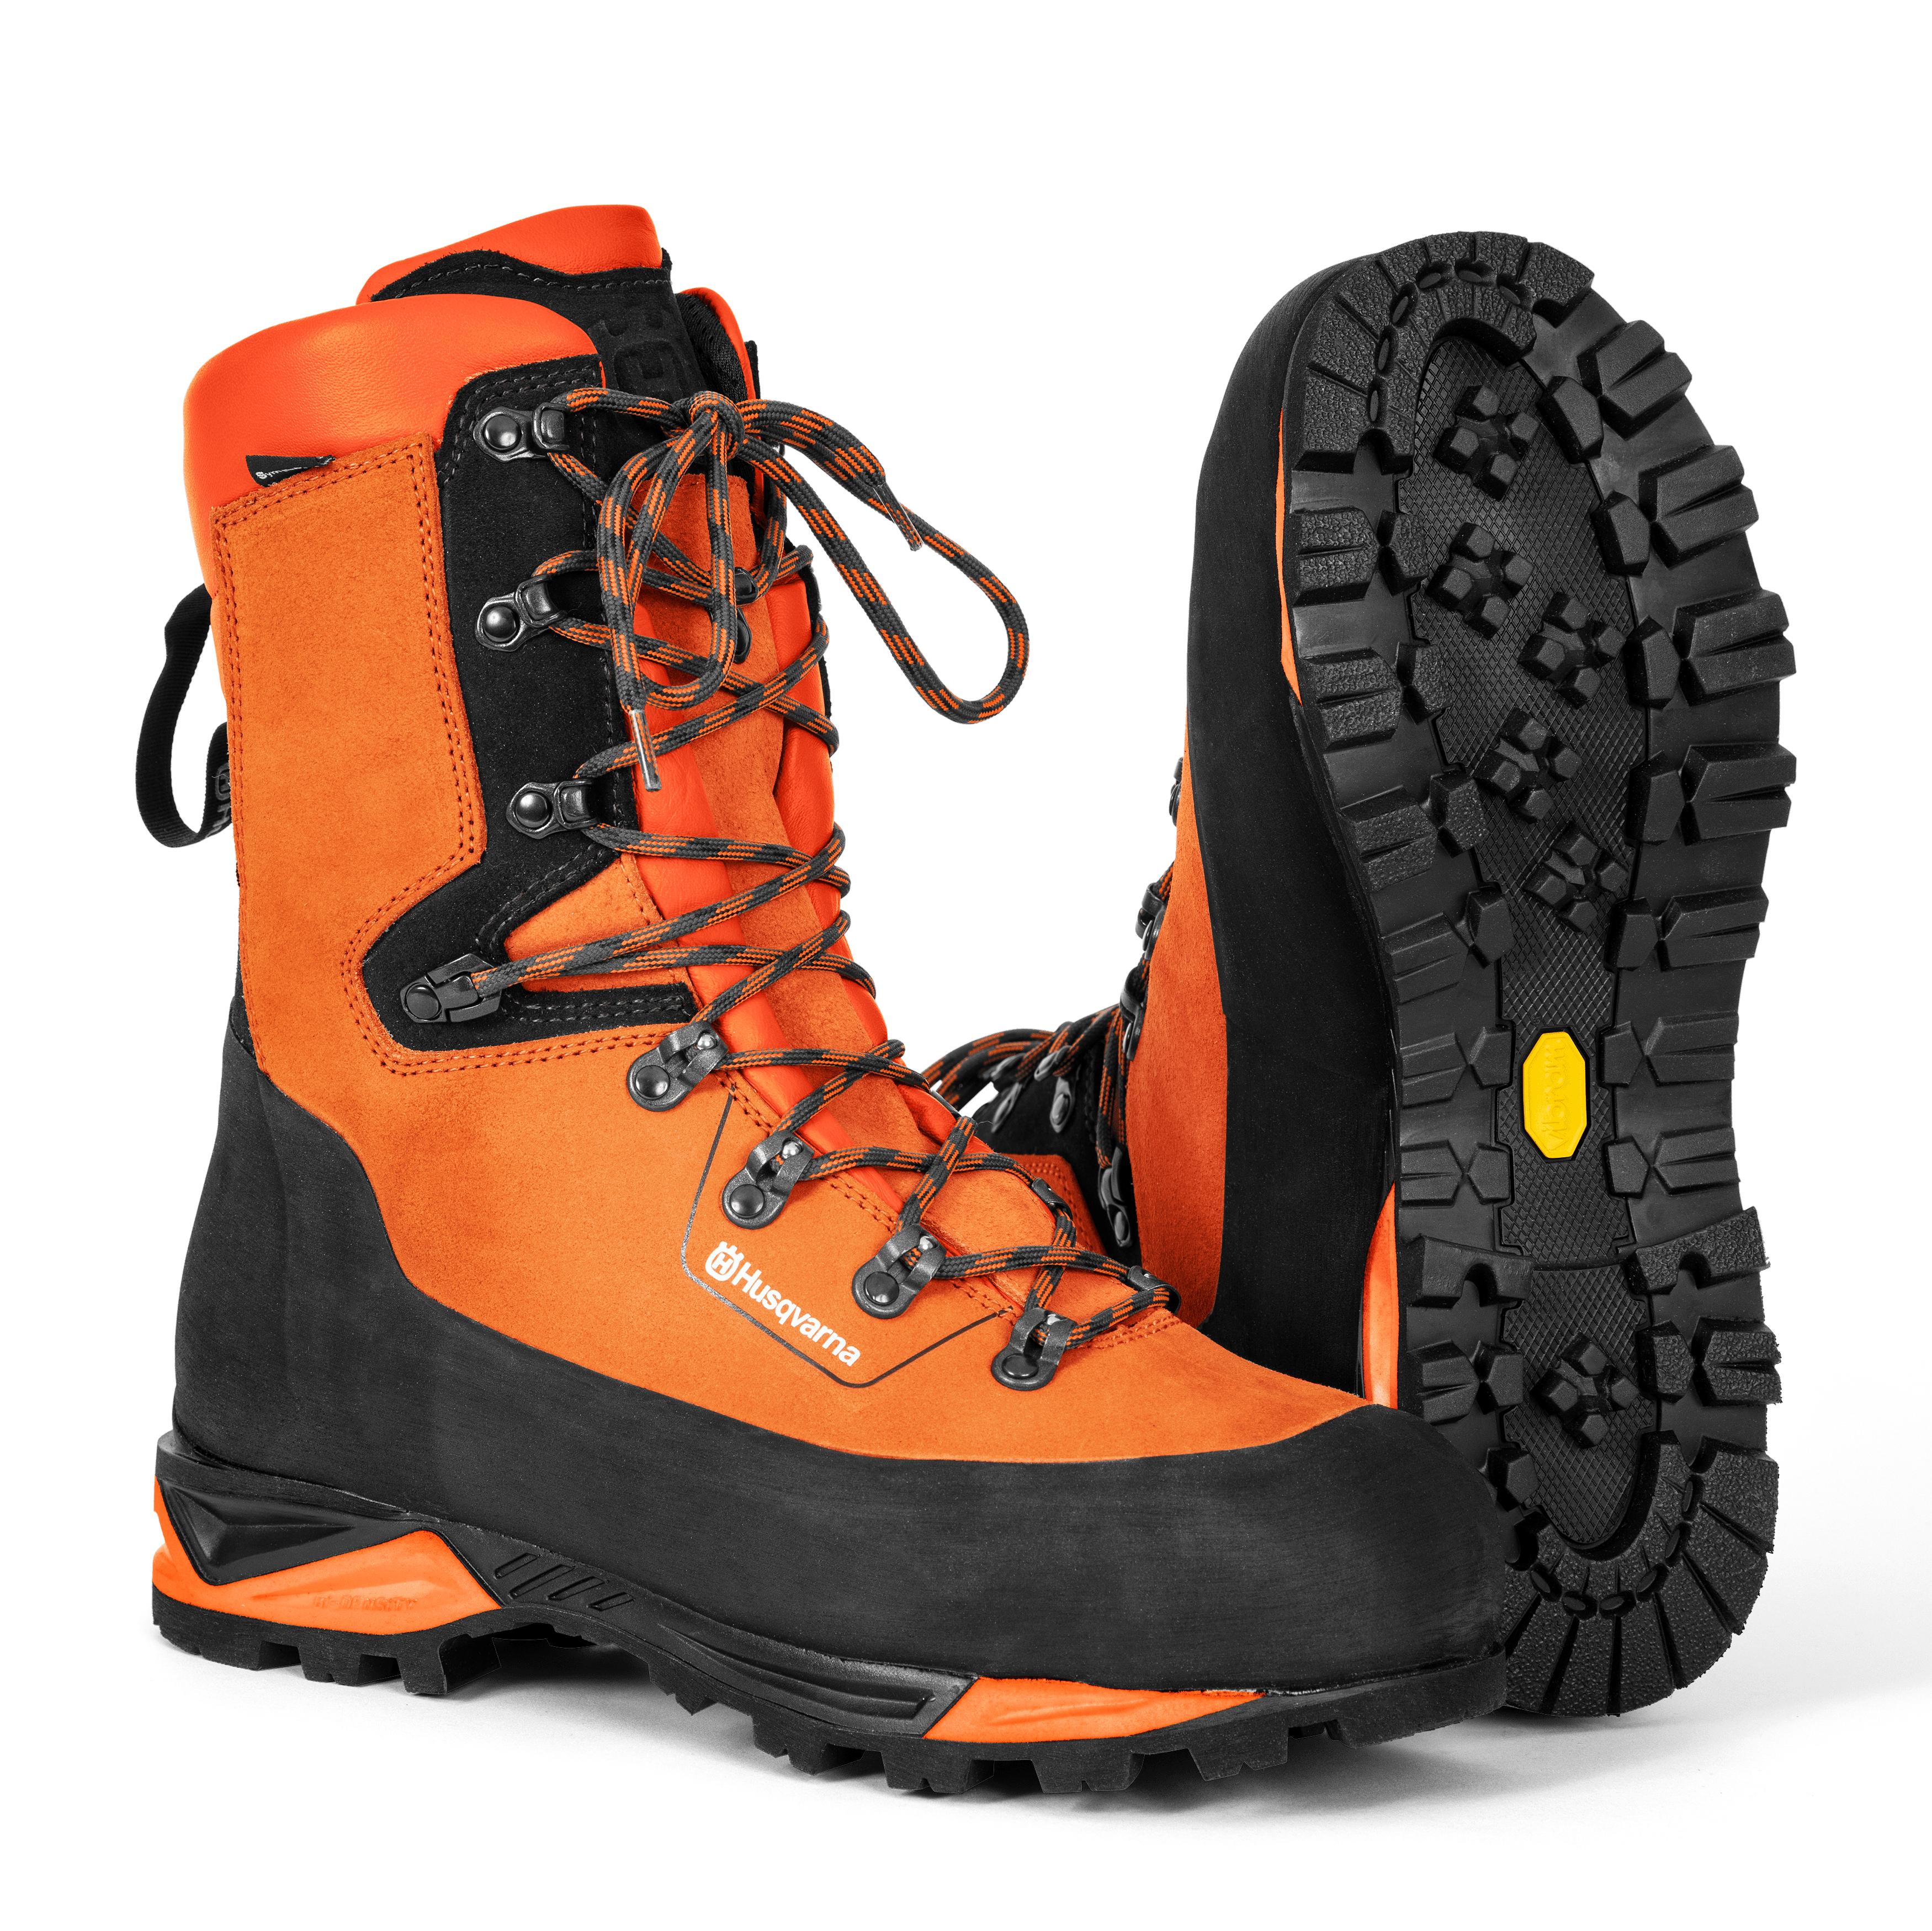 Protective leather boots, Technical, Saw Protection 24m/s, Vibrame Sole